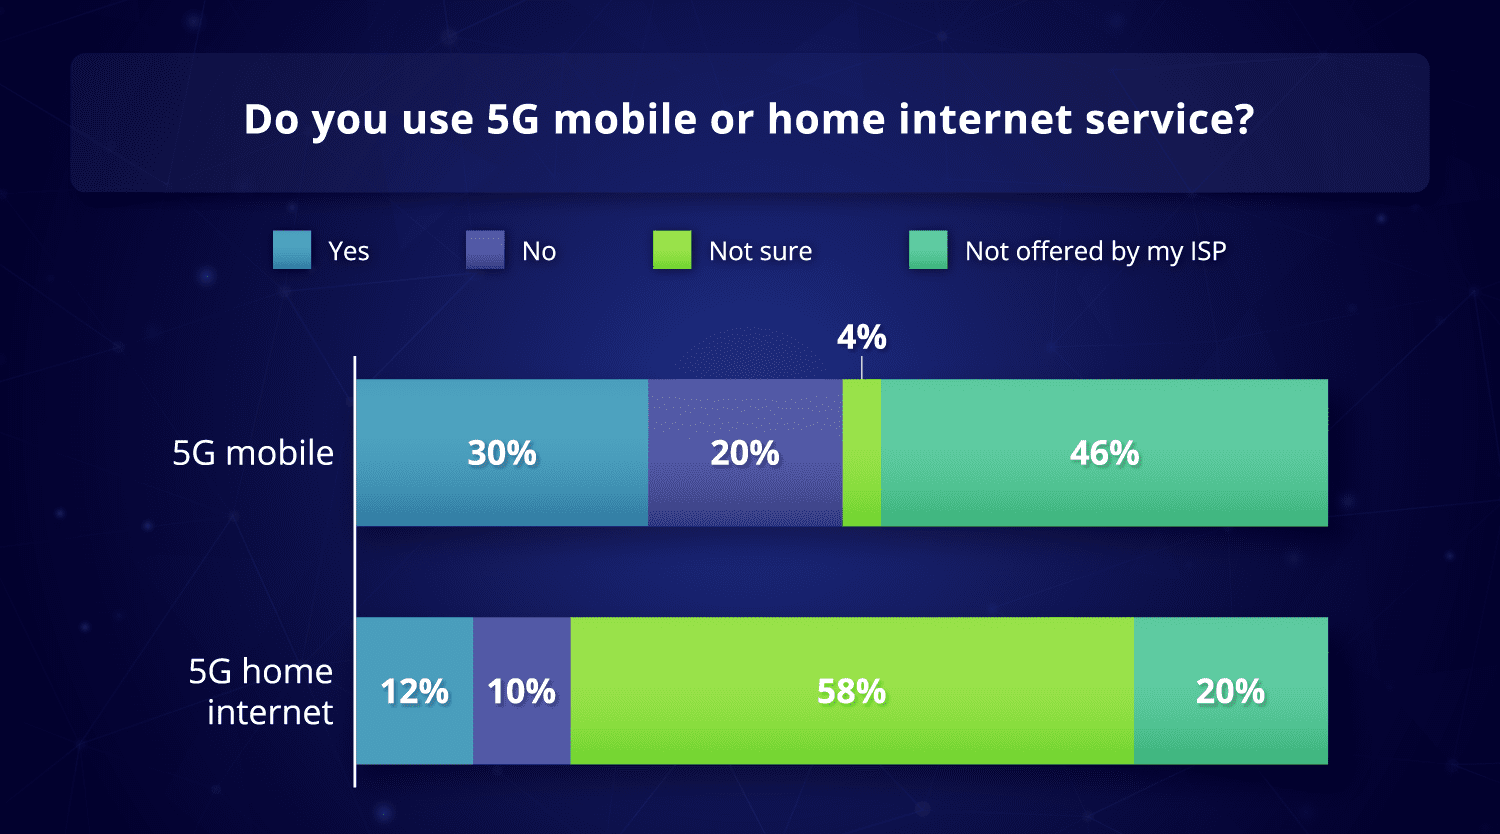 Do you use 5G mobile or home internet service